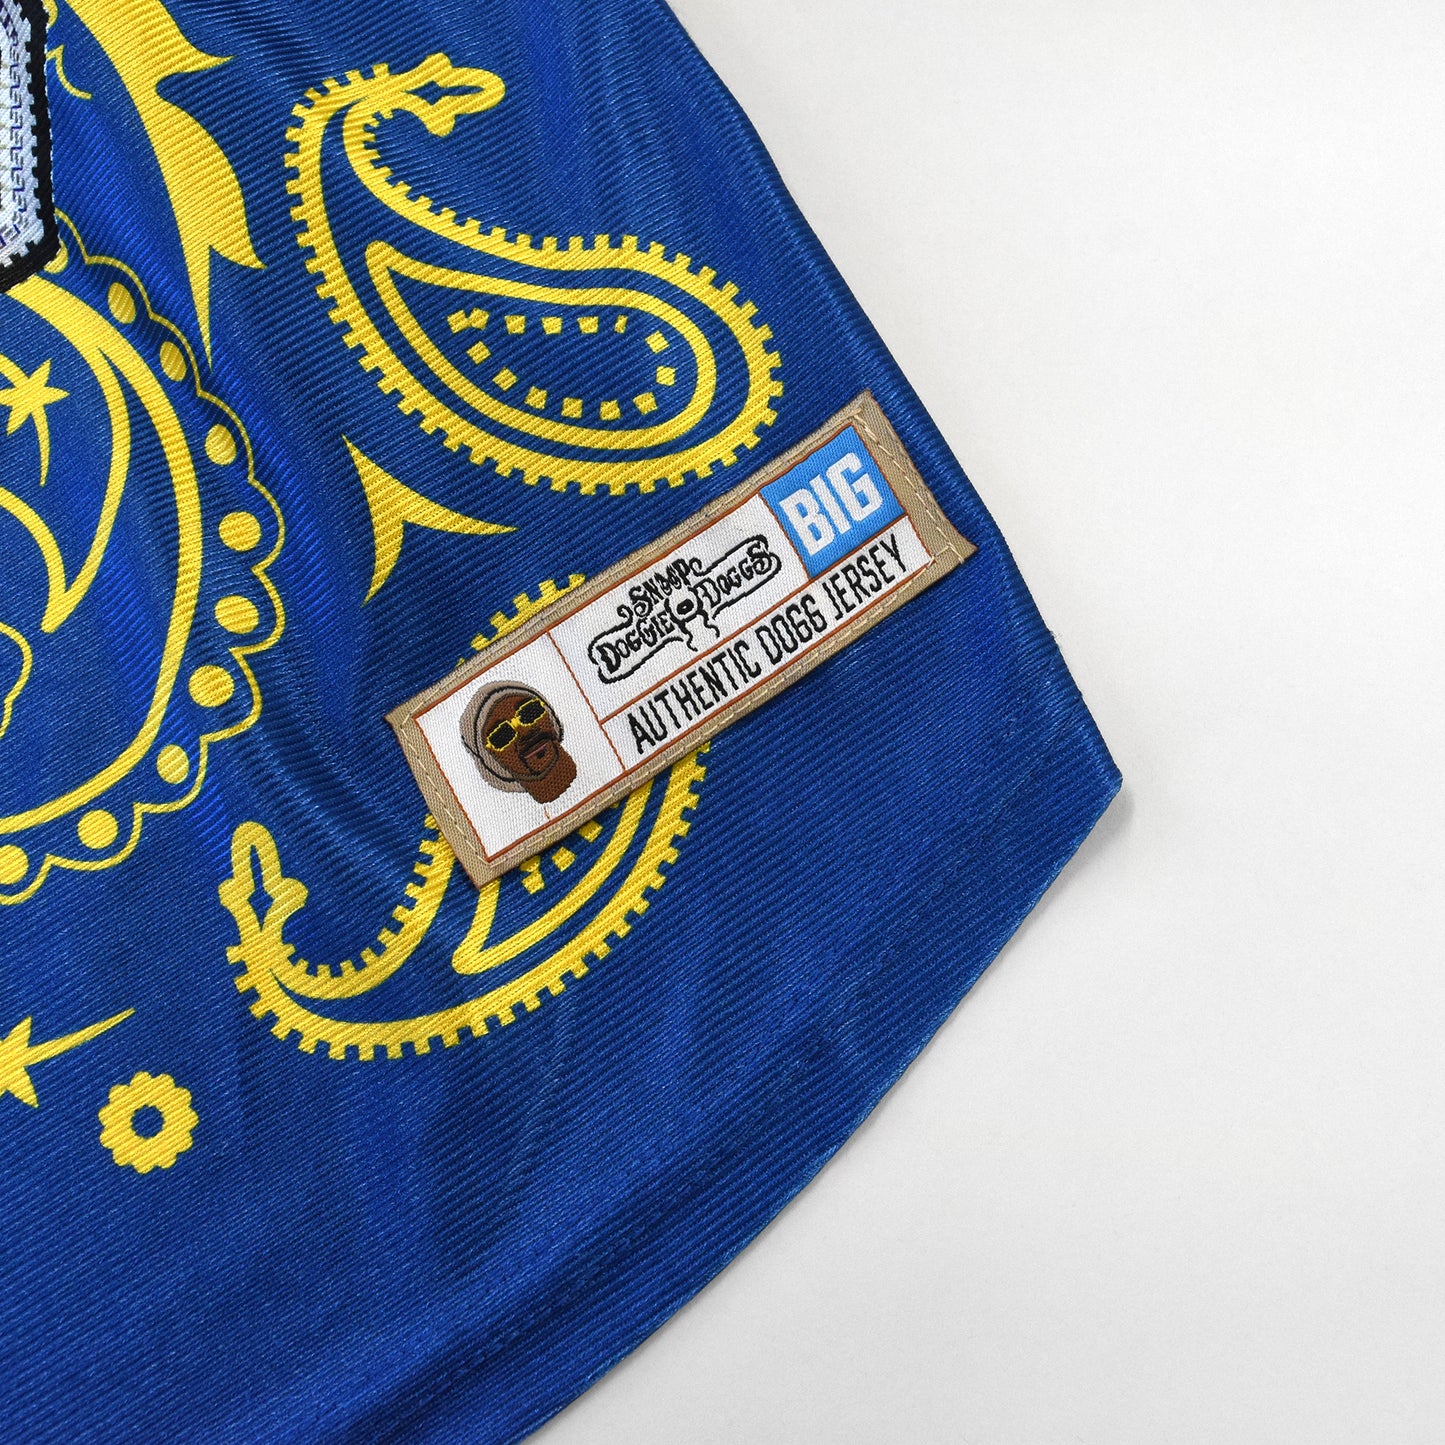 A close up detail image showing design sublimation and embroidered jersey tag of the Halftime Deluxe Pet Jersey.